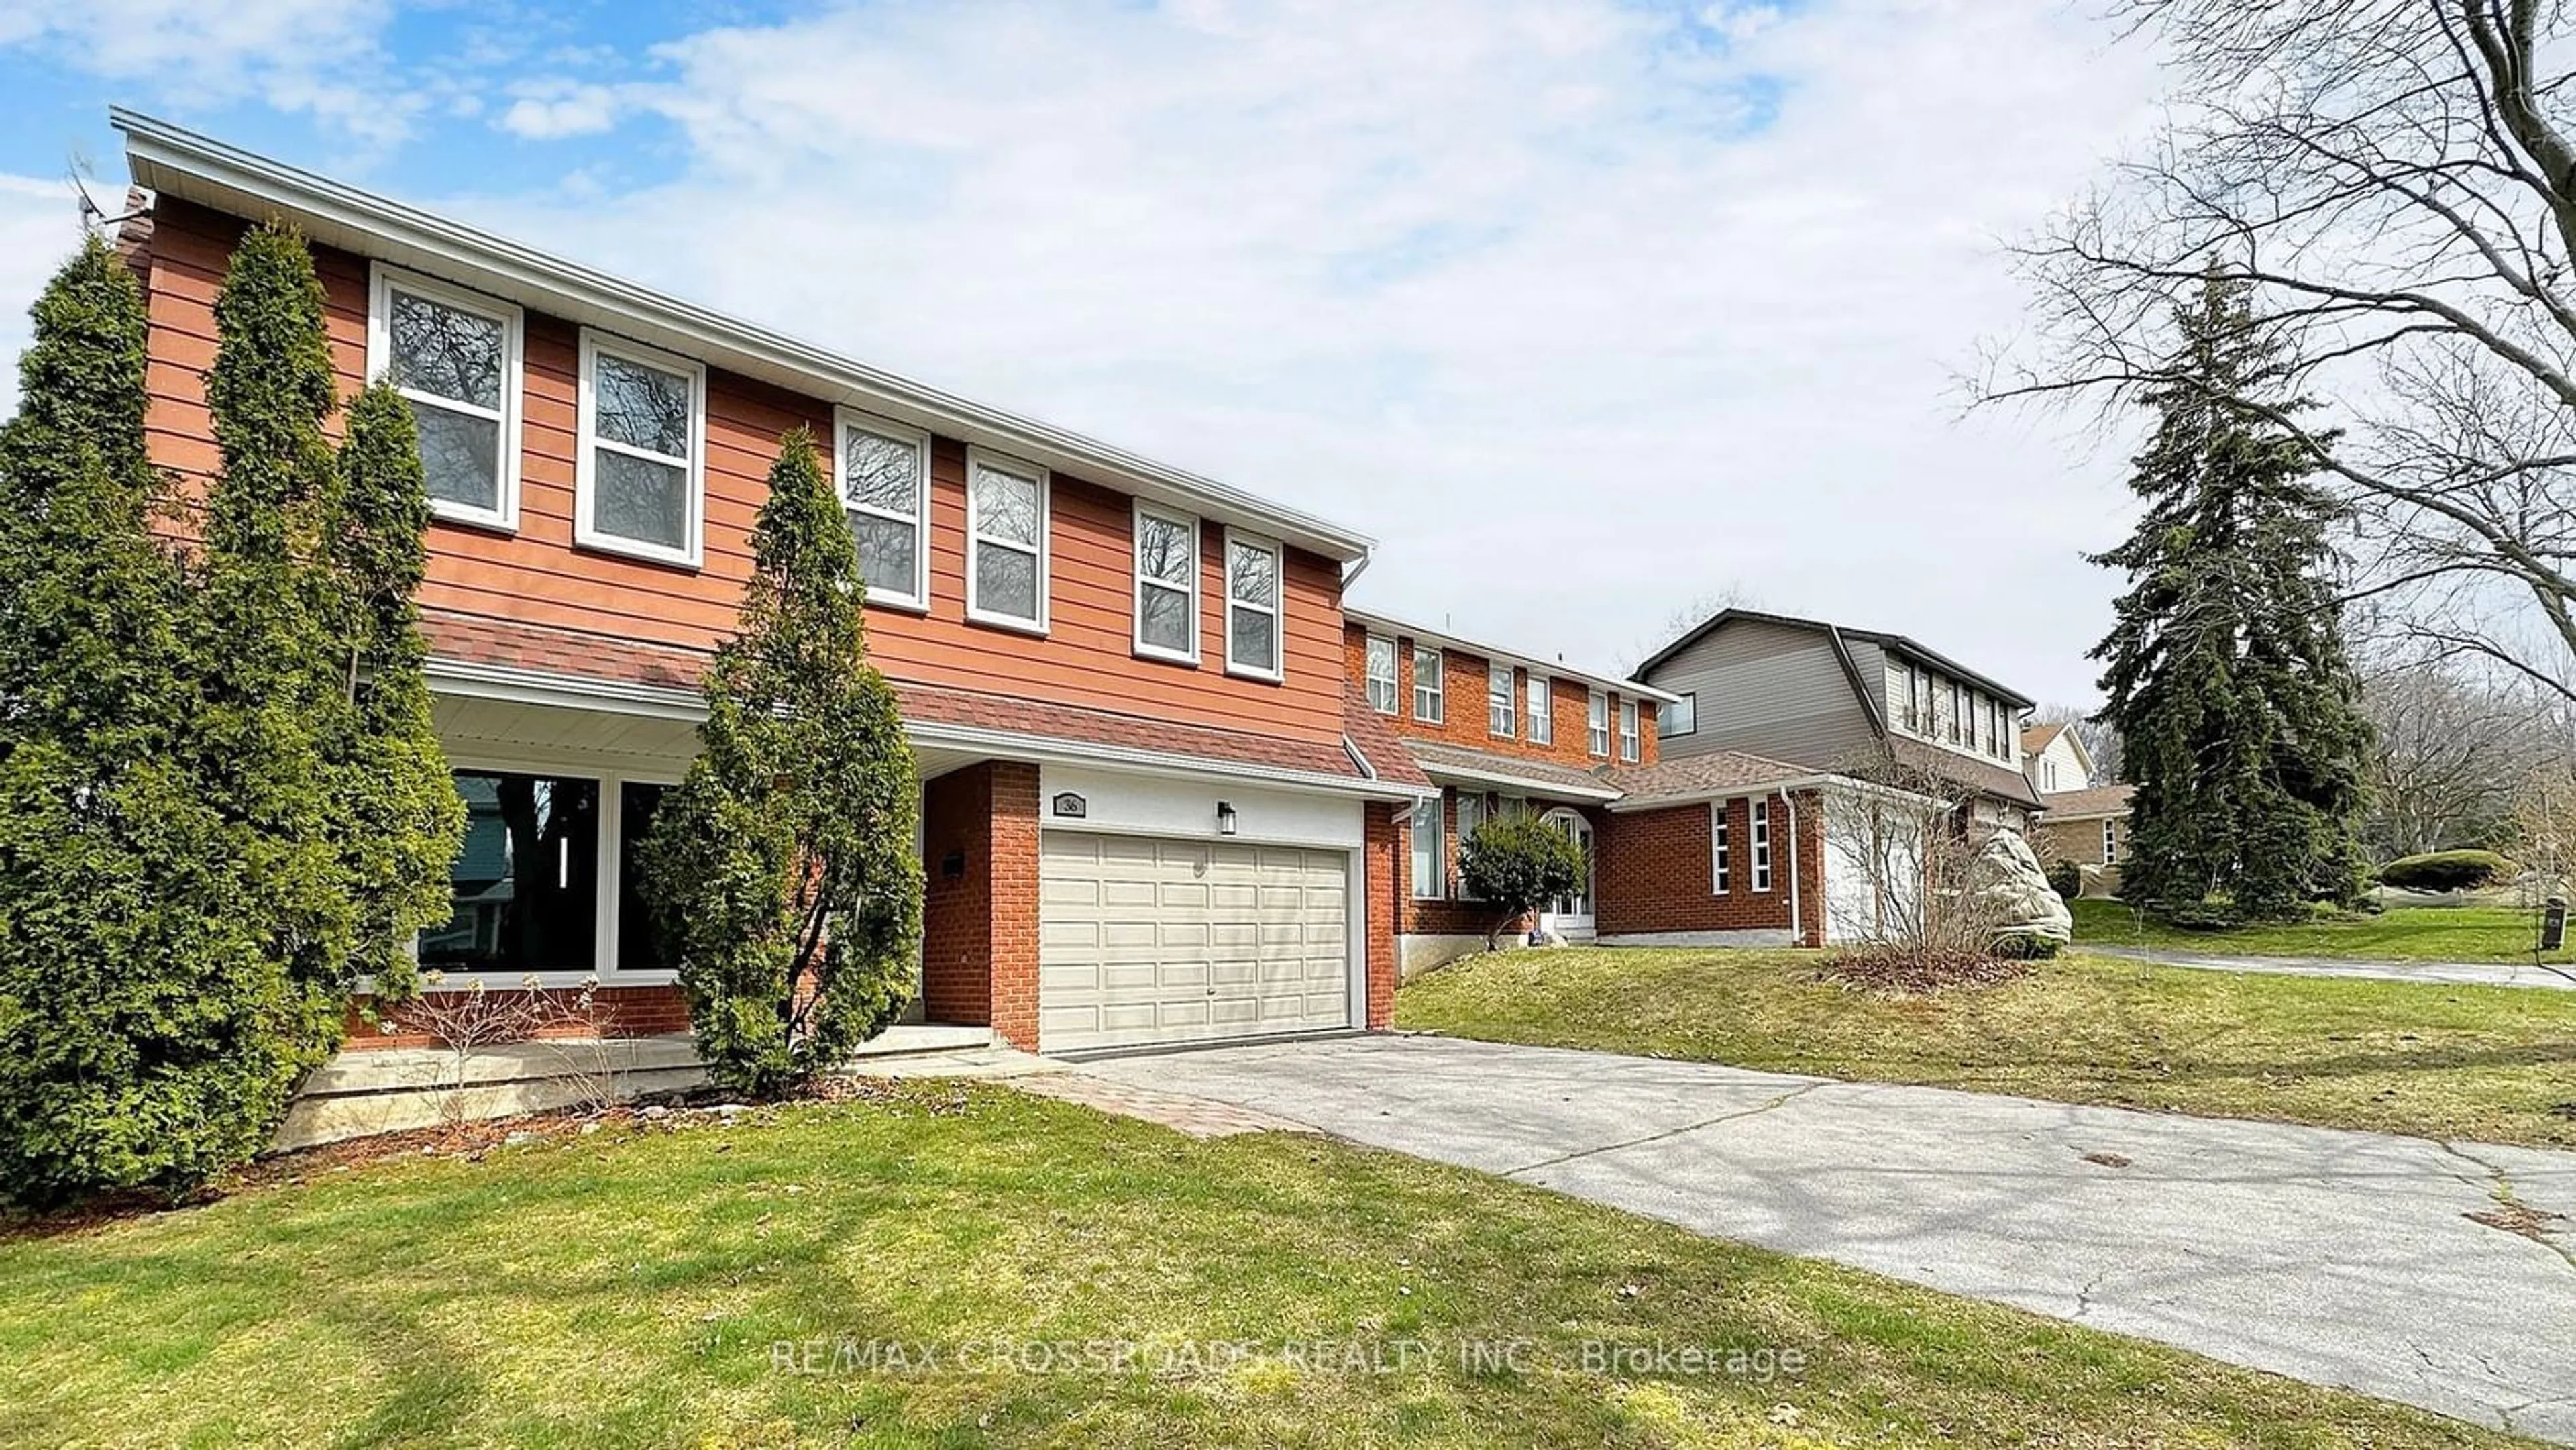 Home with brick exterior material for 36 Flowervale Rd, Markham Ontario L3T 4J4